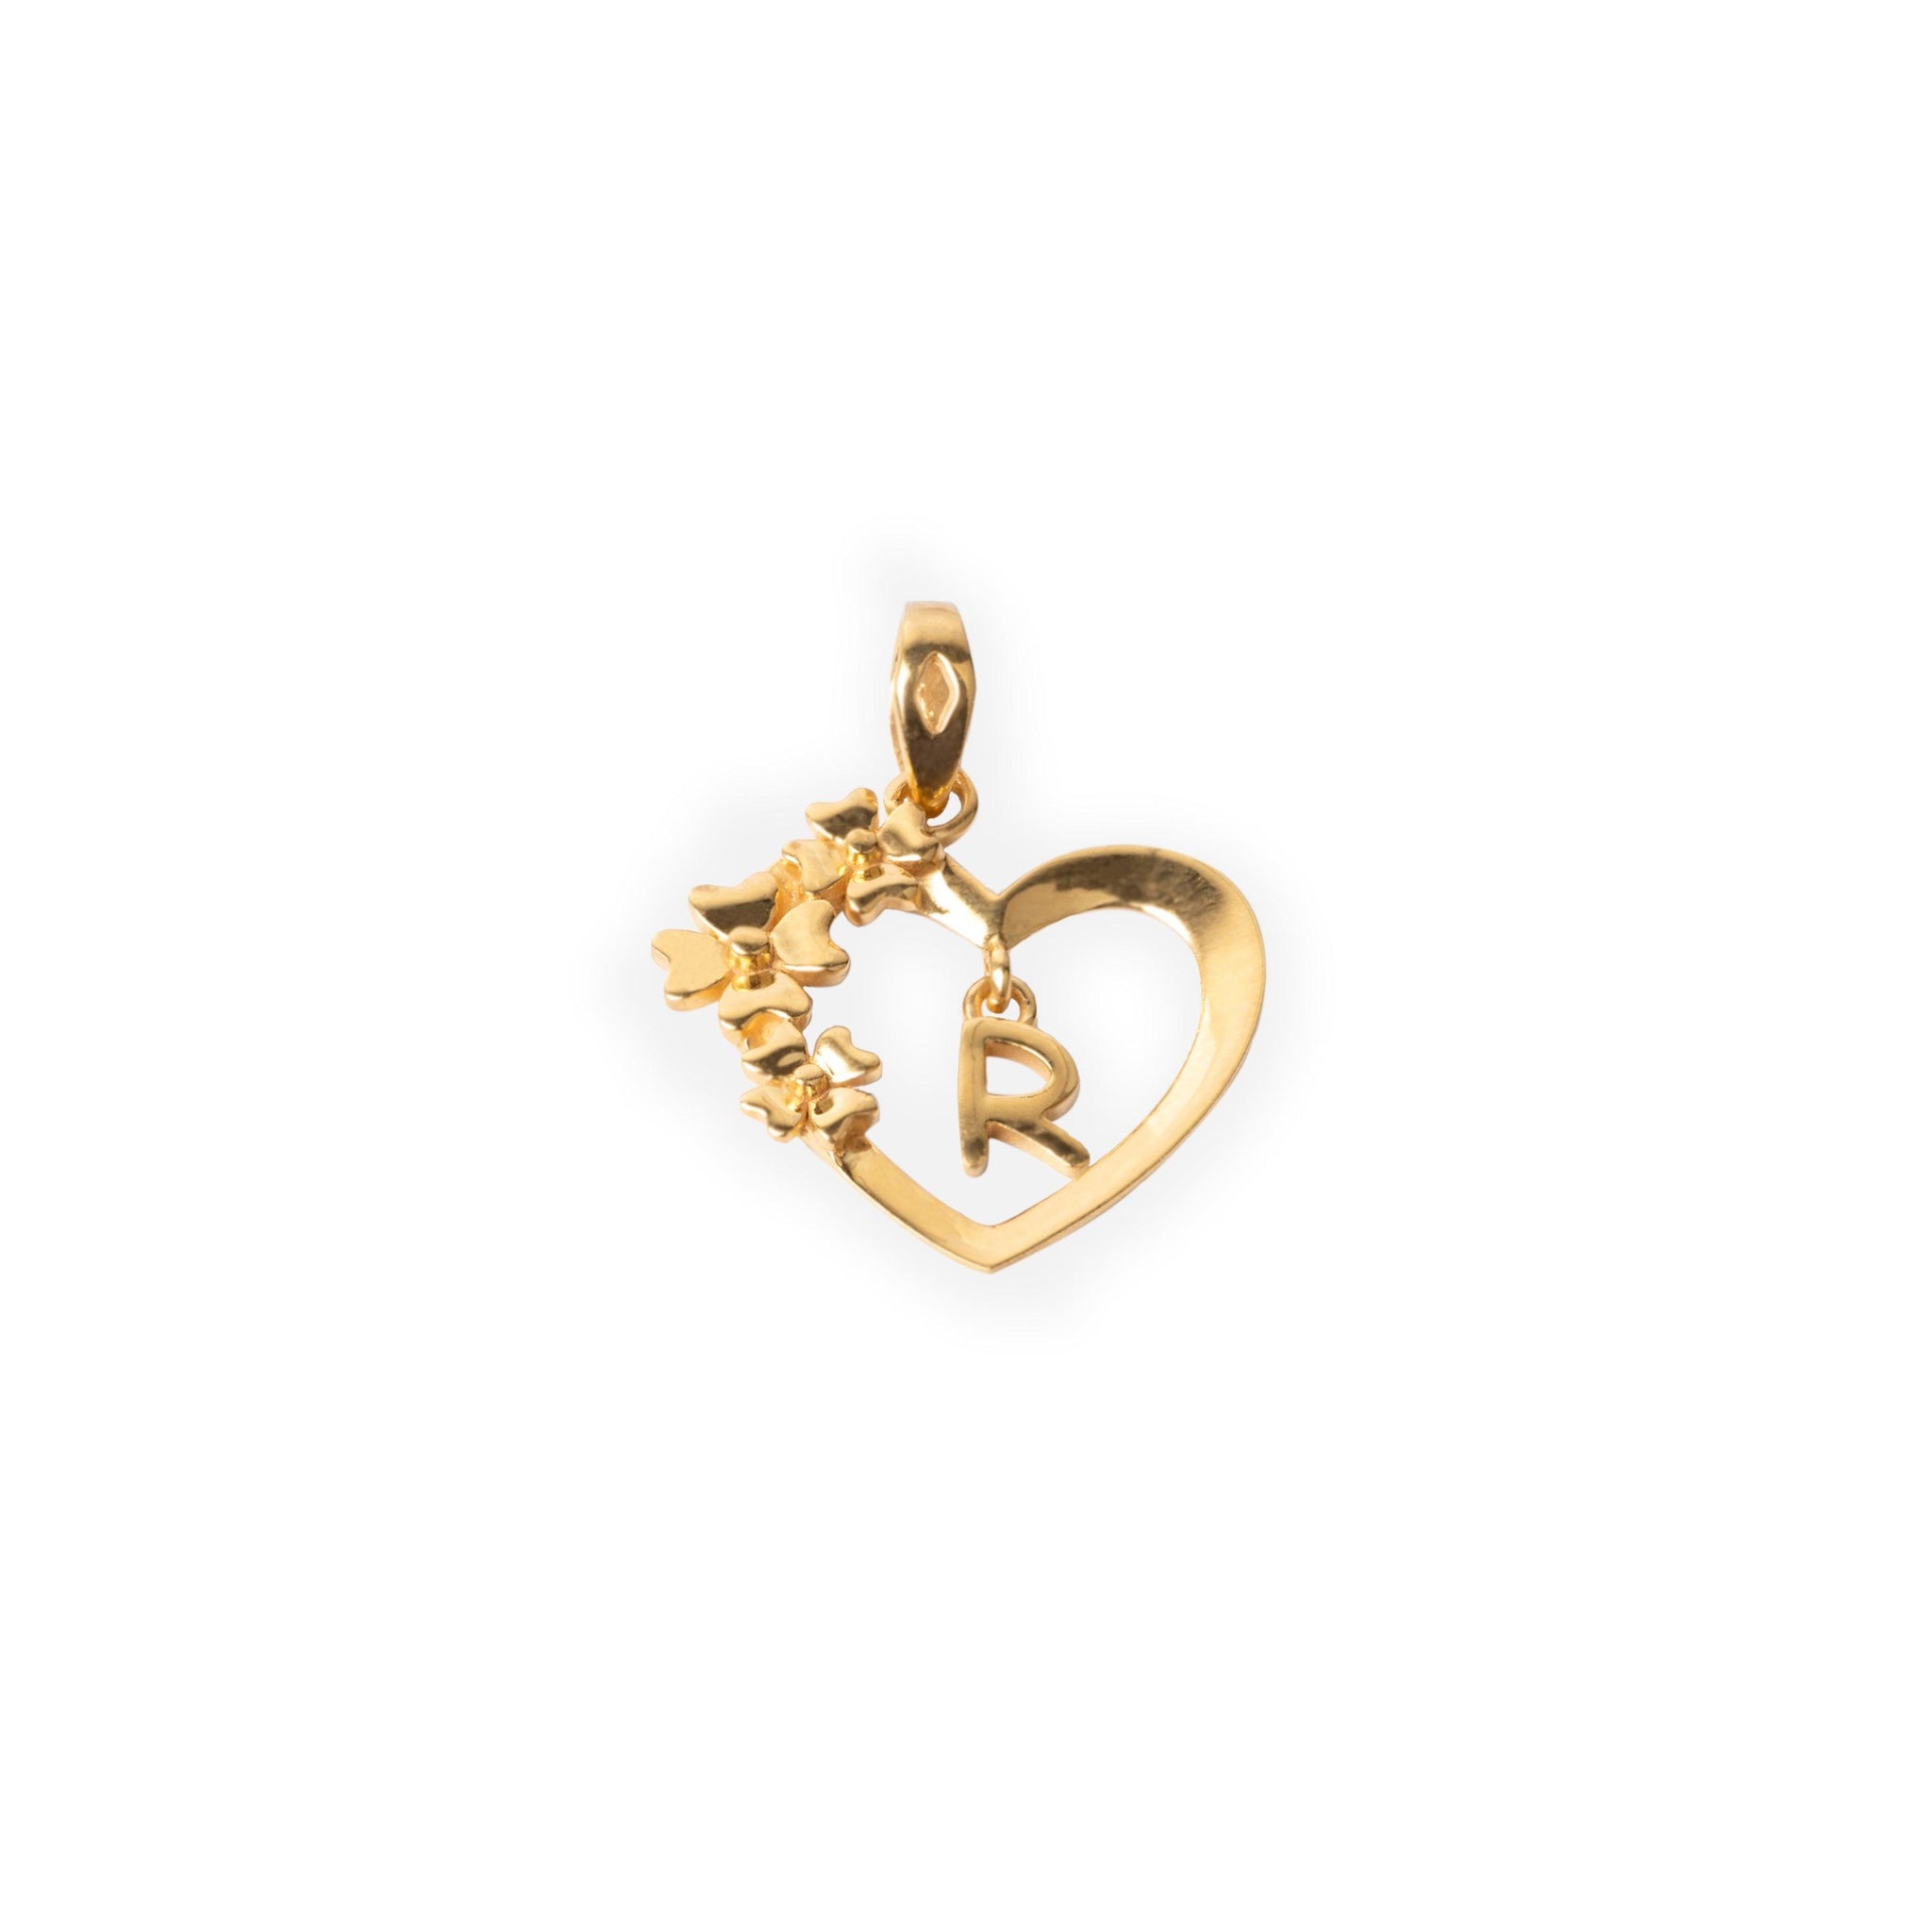 'R' 22ct Gold Heart Shape Initial Pendant with Flower Design P-7035-R